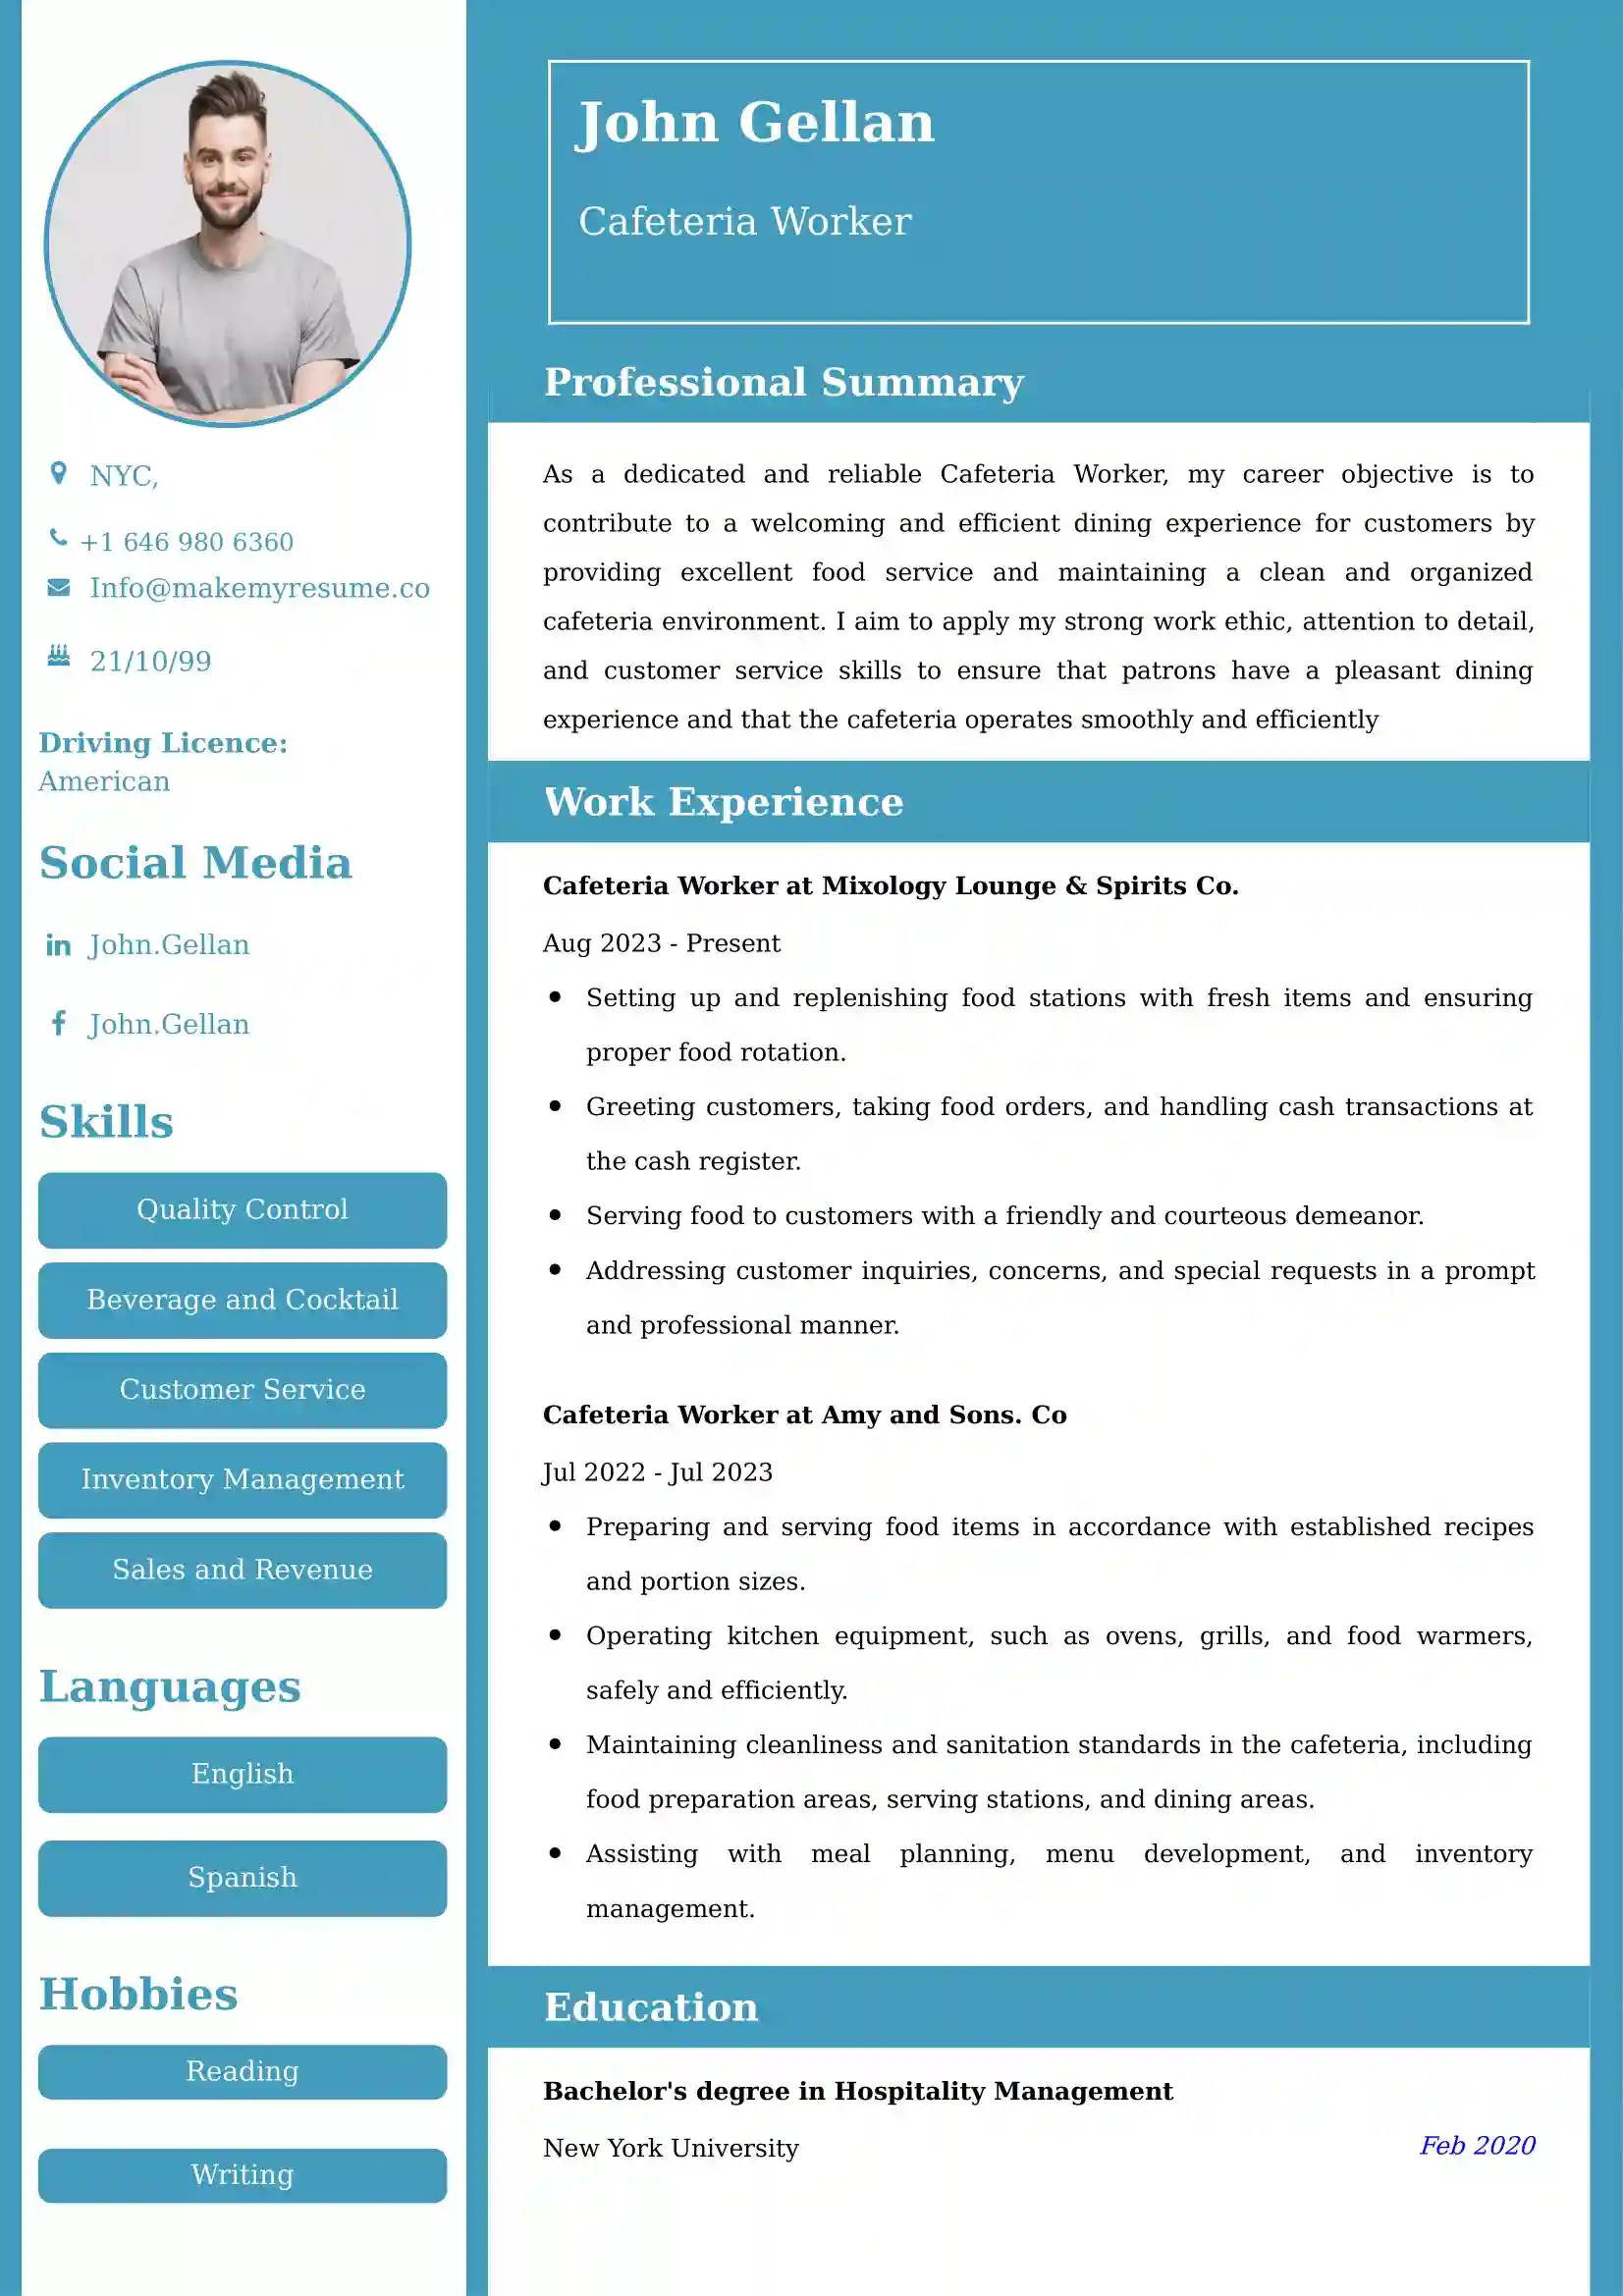 Cafeteria Worker CV Examples - US Format